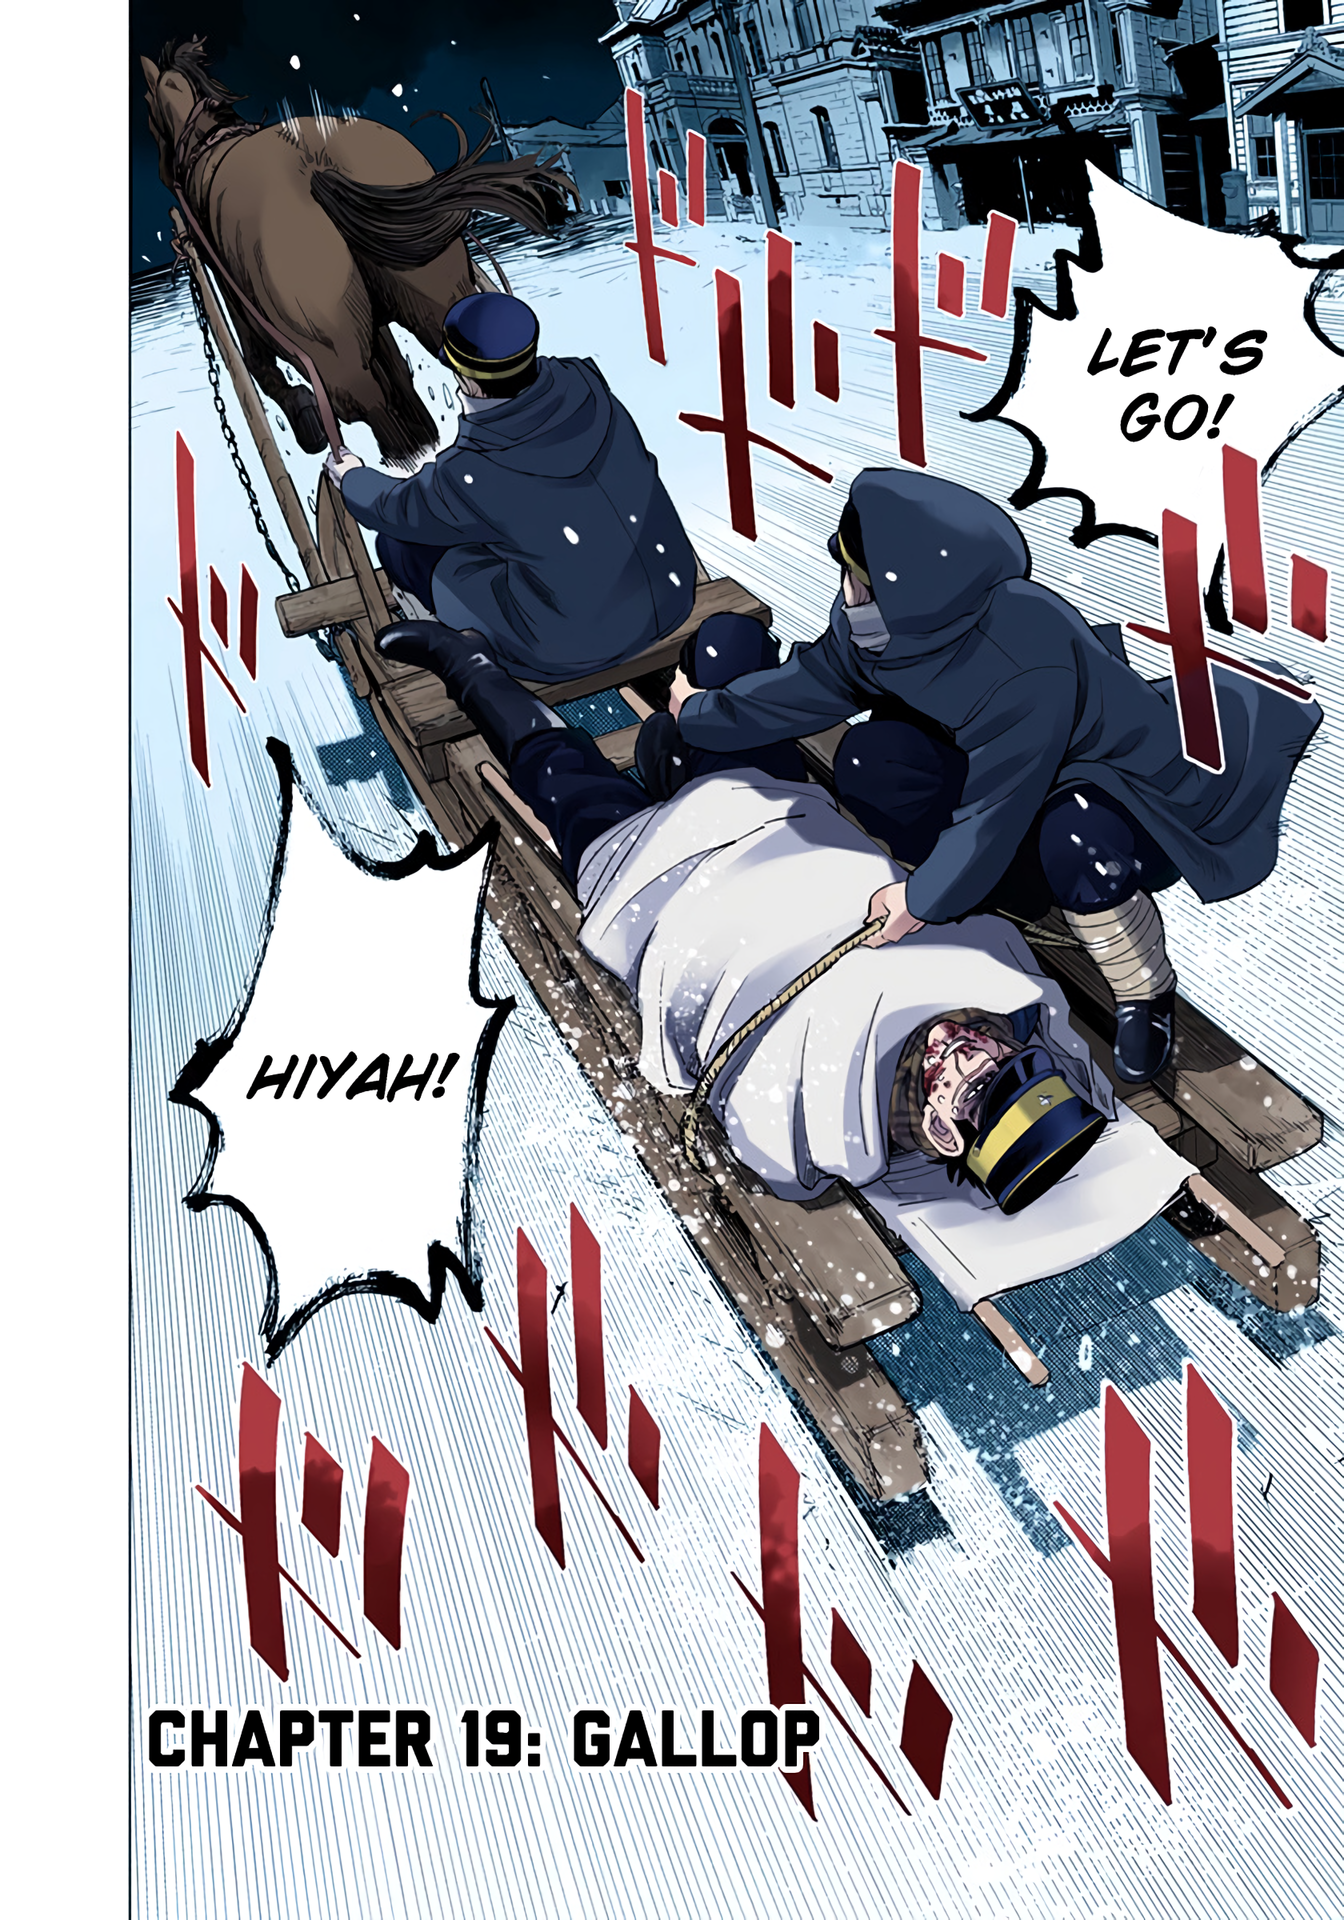 Golden Kamuy - Digital Colored Comics Vol.3 Chapter 19: Gallop - Picture 2